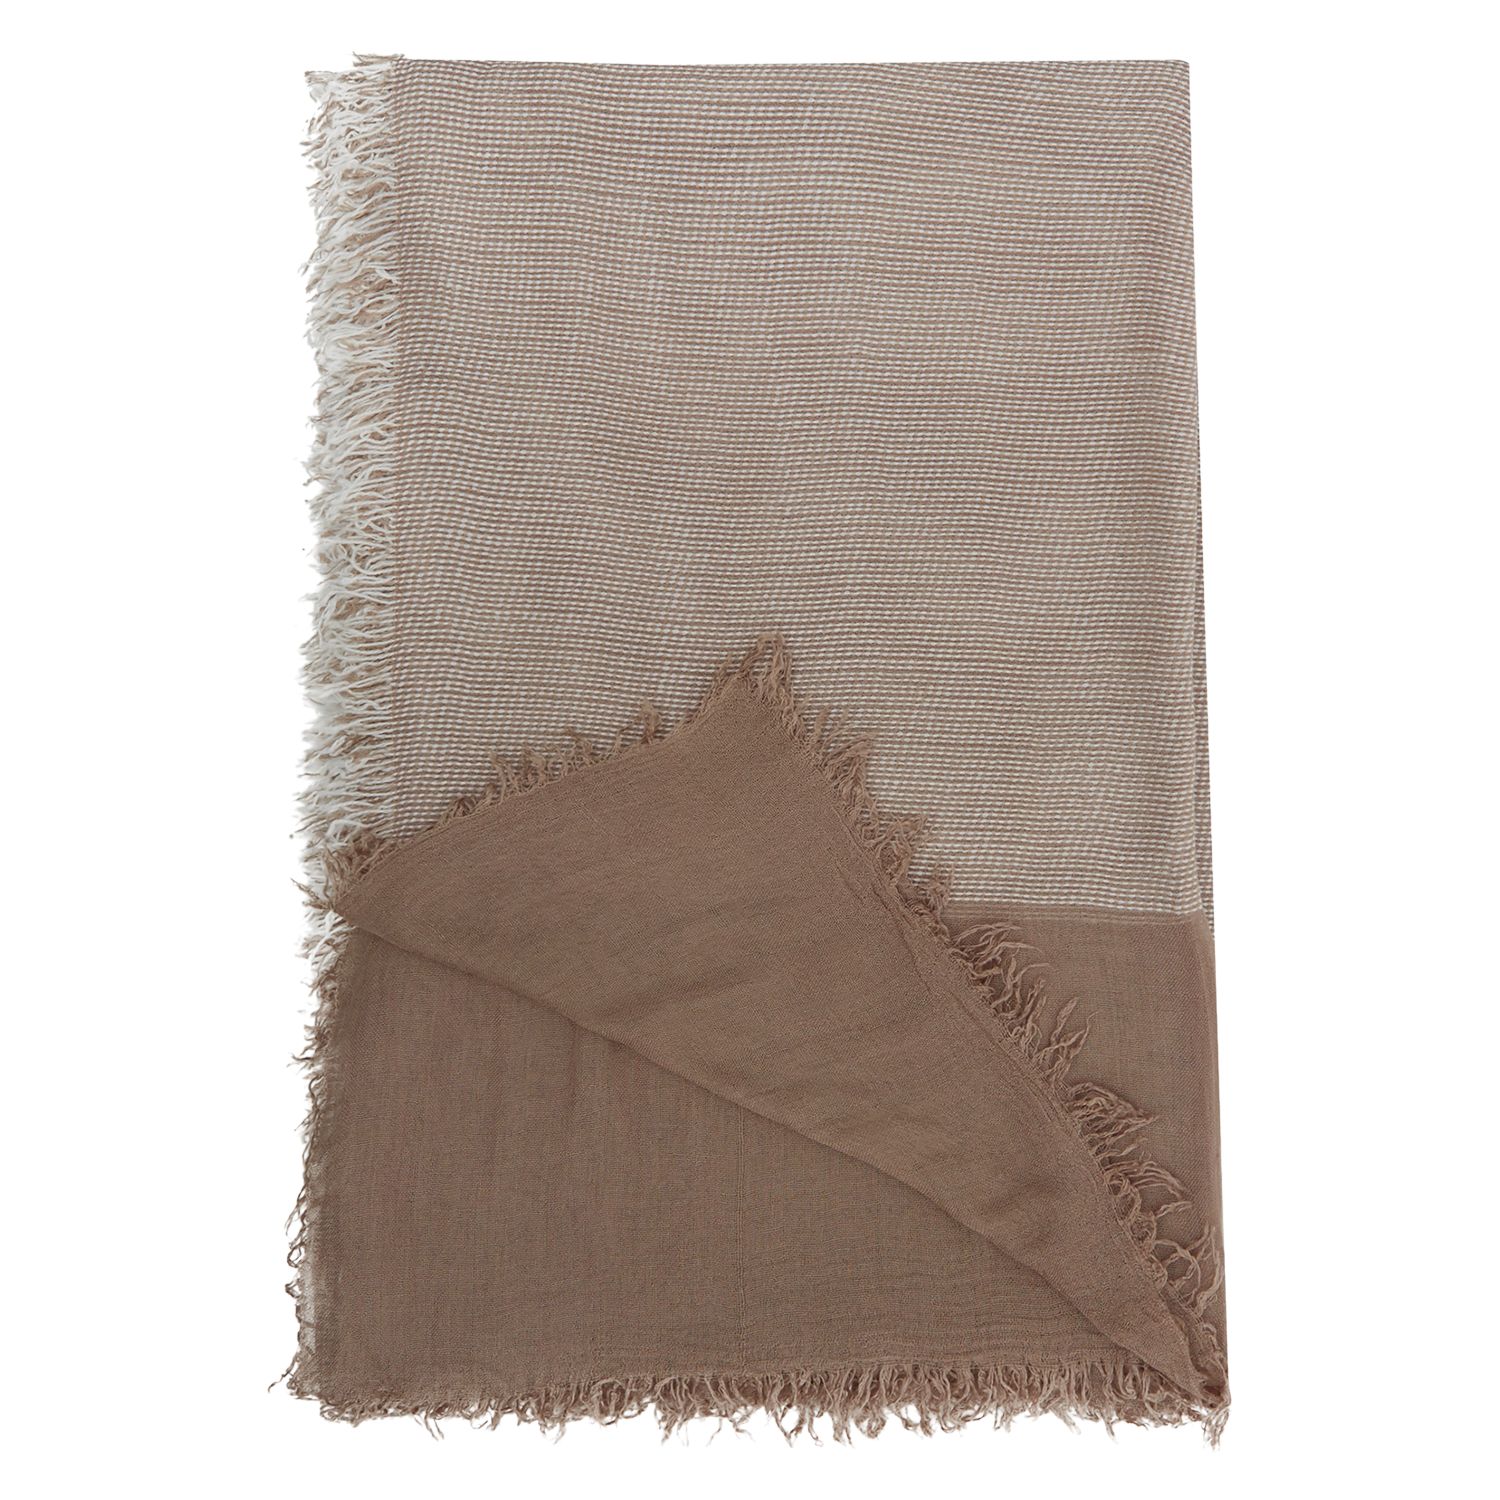 French Connection Inez Scarf, Mink/Summer White